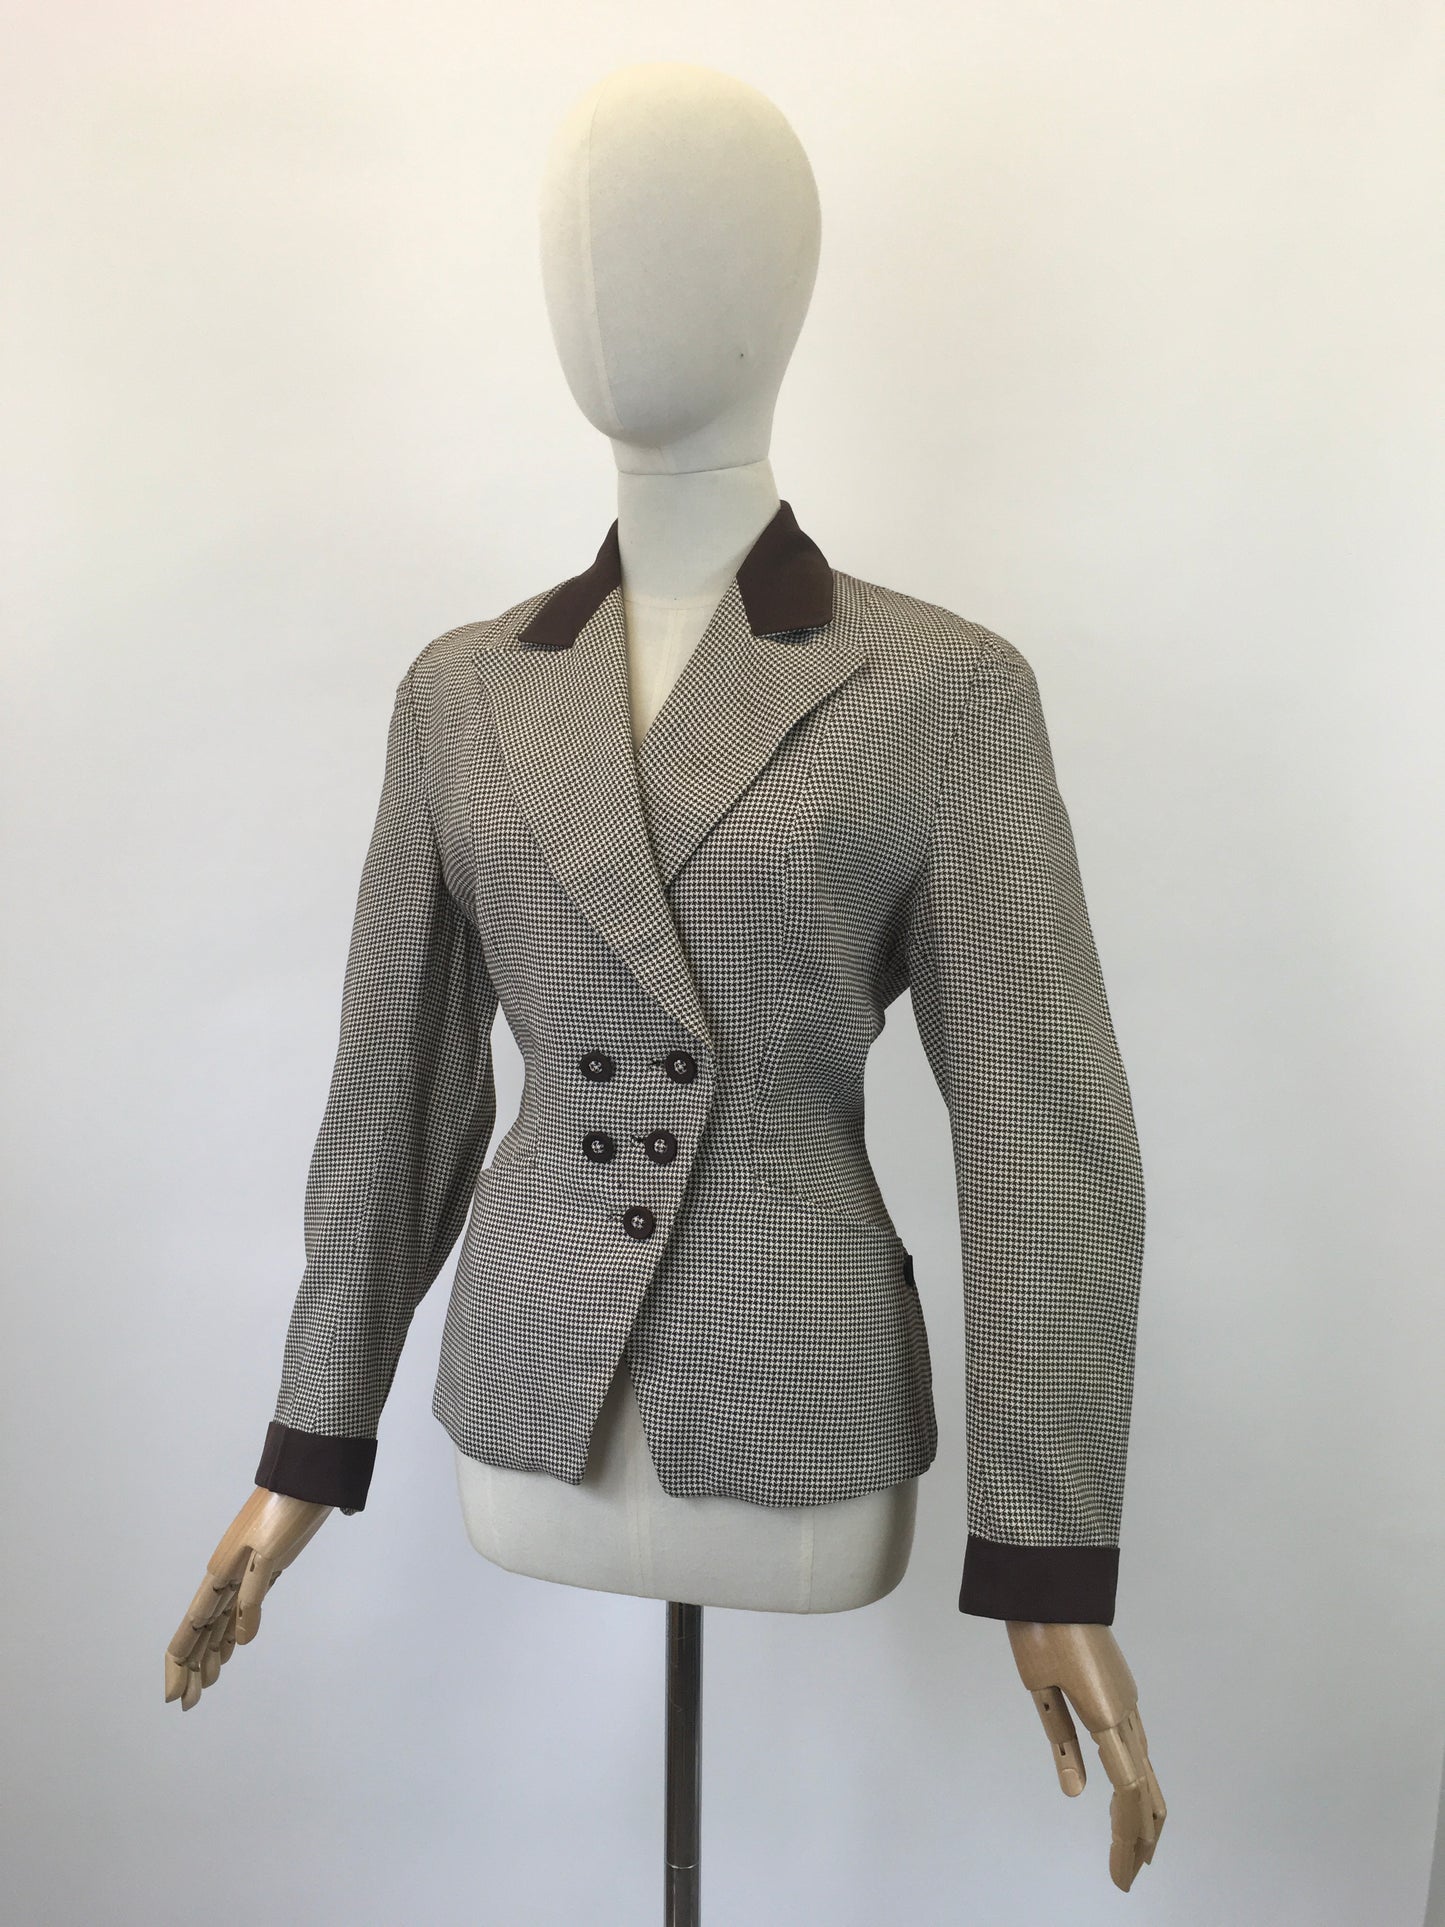 Original 1940's Stunning Asymmetric Jacket - In A Coffee And Cream Houndstooth